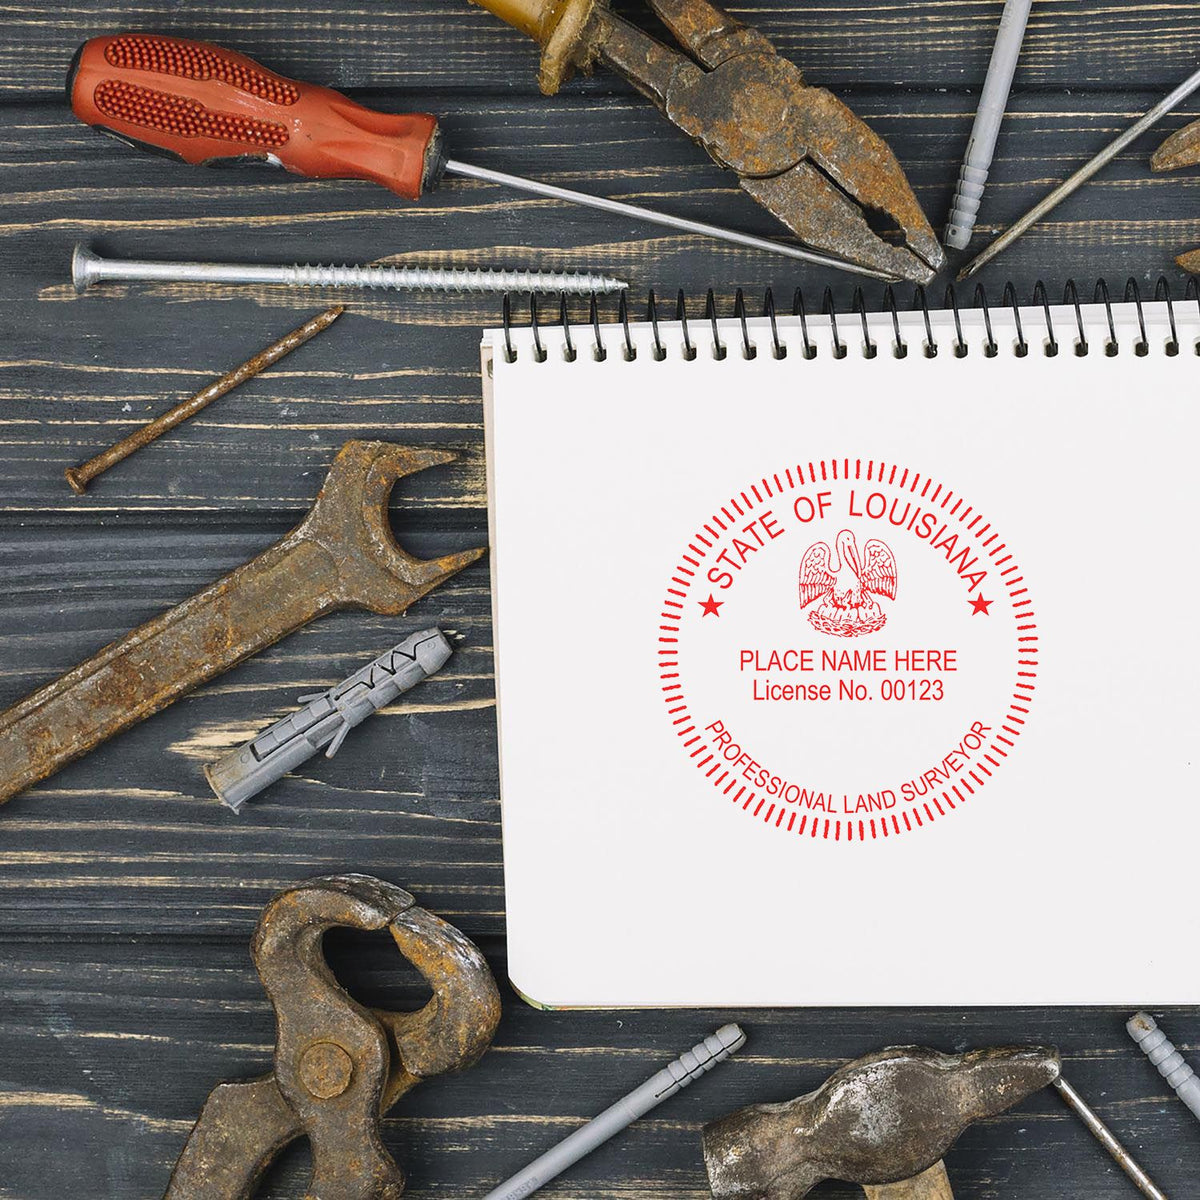 The Slim Pre-Inked Louisiana Land Surveyor Seal Stamp stamp impression comes to life with a crisp, detailed photo on paper - showcasing true professional quality.